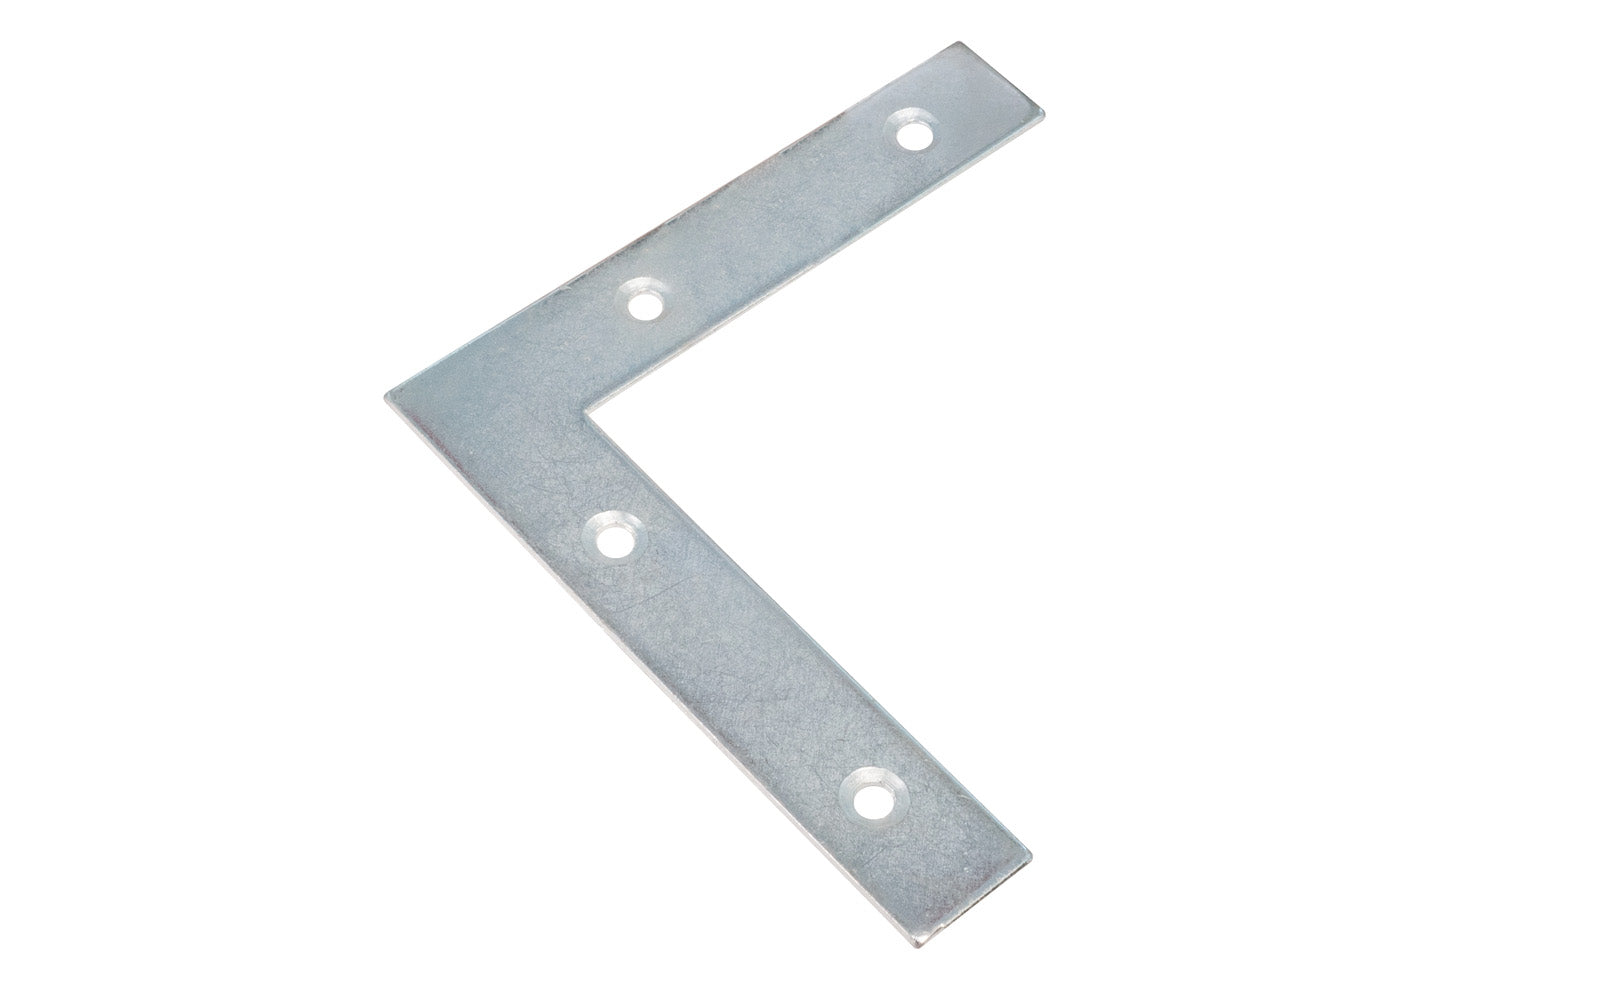 These flat corner irons are designed for furniture, cabinets, shelving support, etc. Allows for quick & easy repair of items in the workshop, home, & other applications. Made of steel material with a zinc plated finish. Countersunk holes. Sold as singles, or bulk box of (48) flat corner braces. 2-1/2